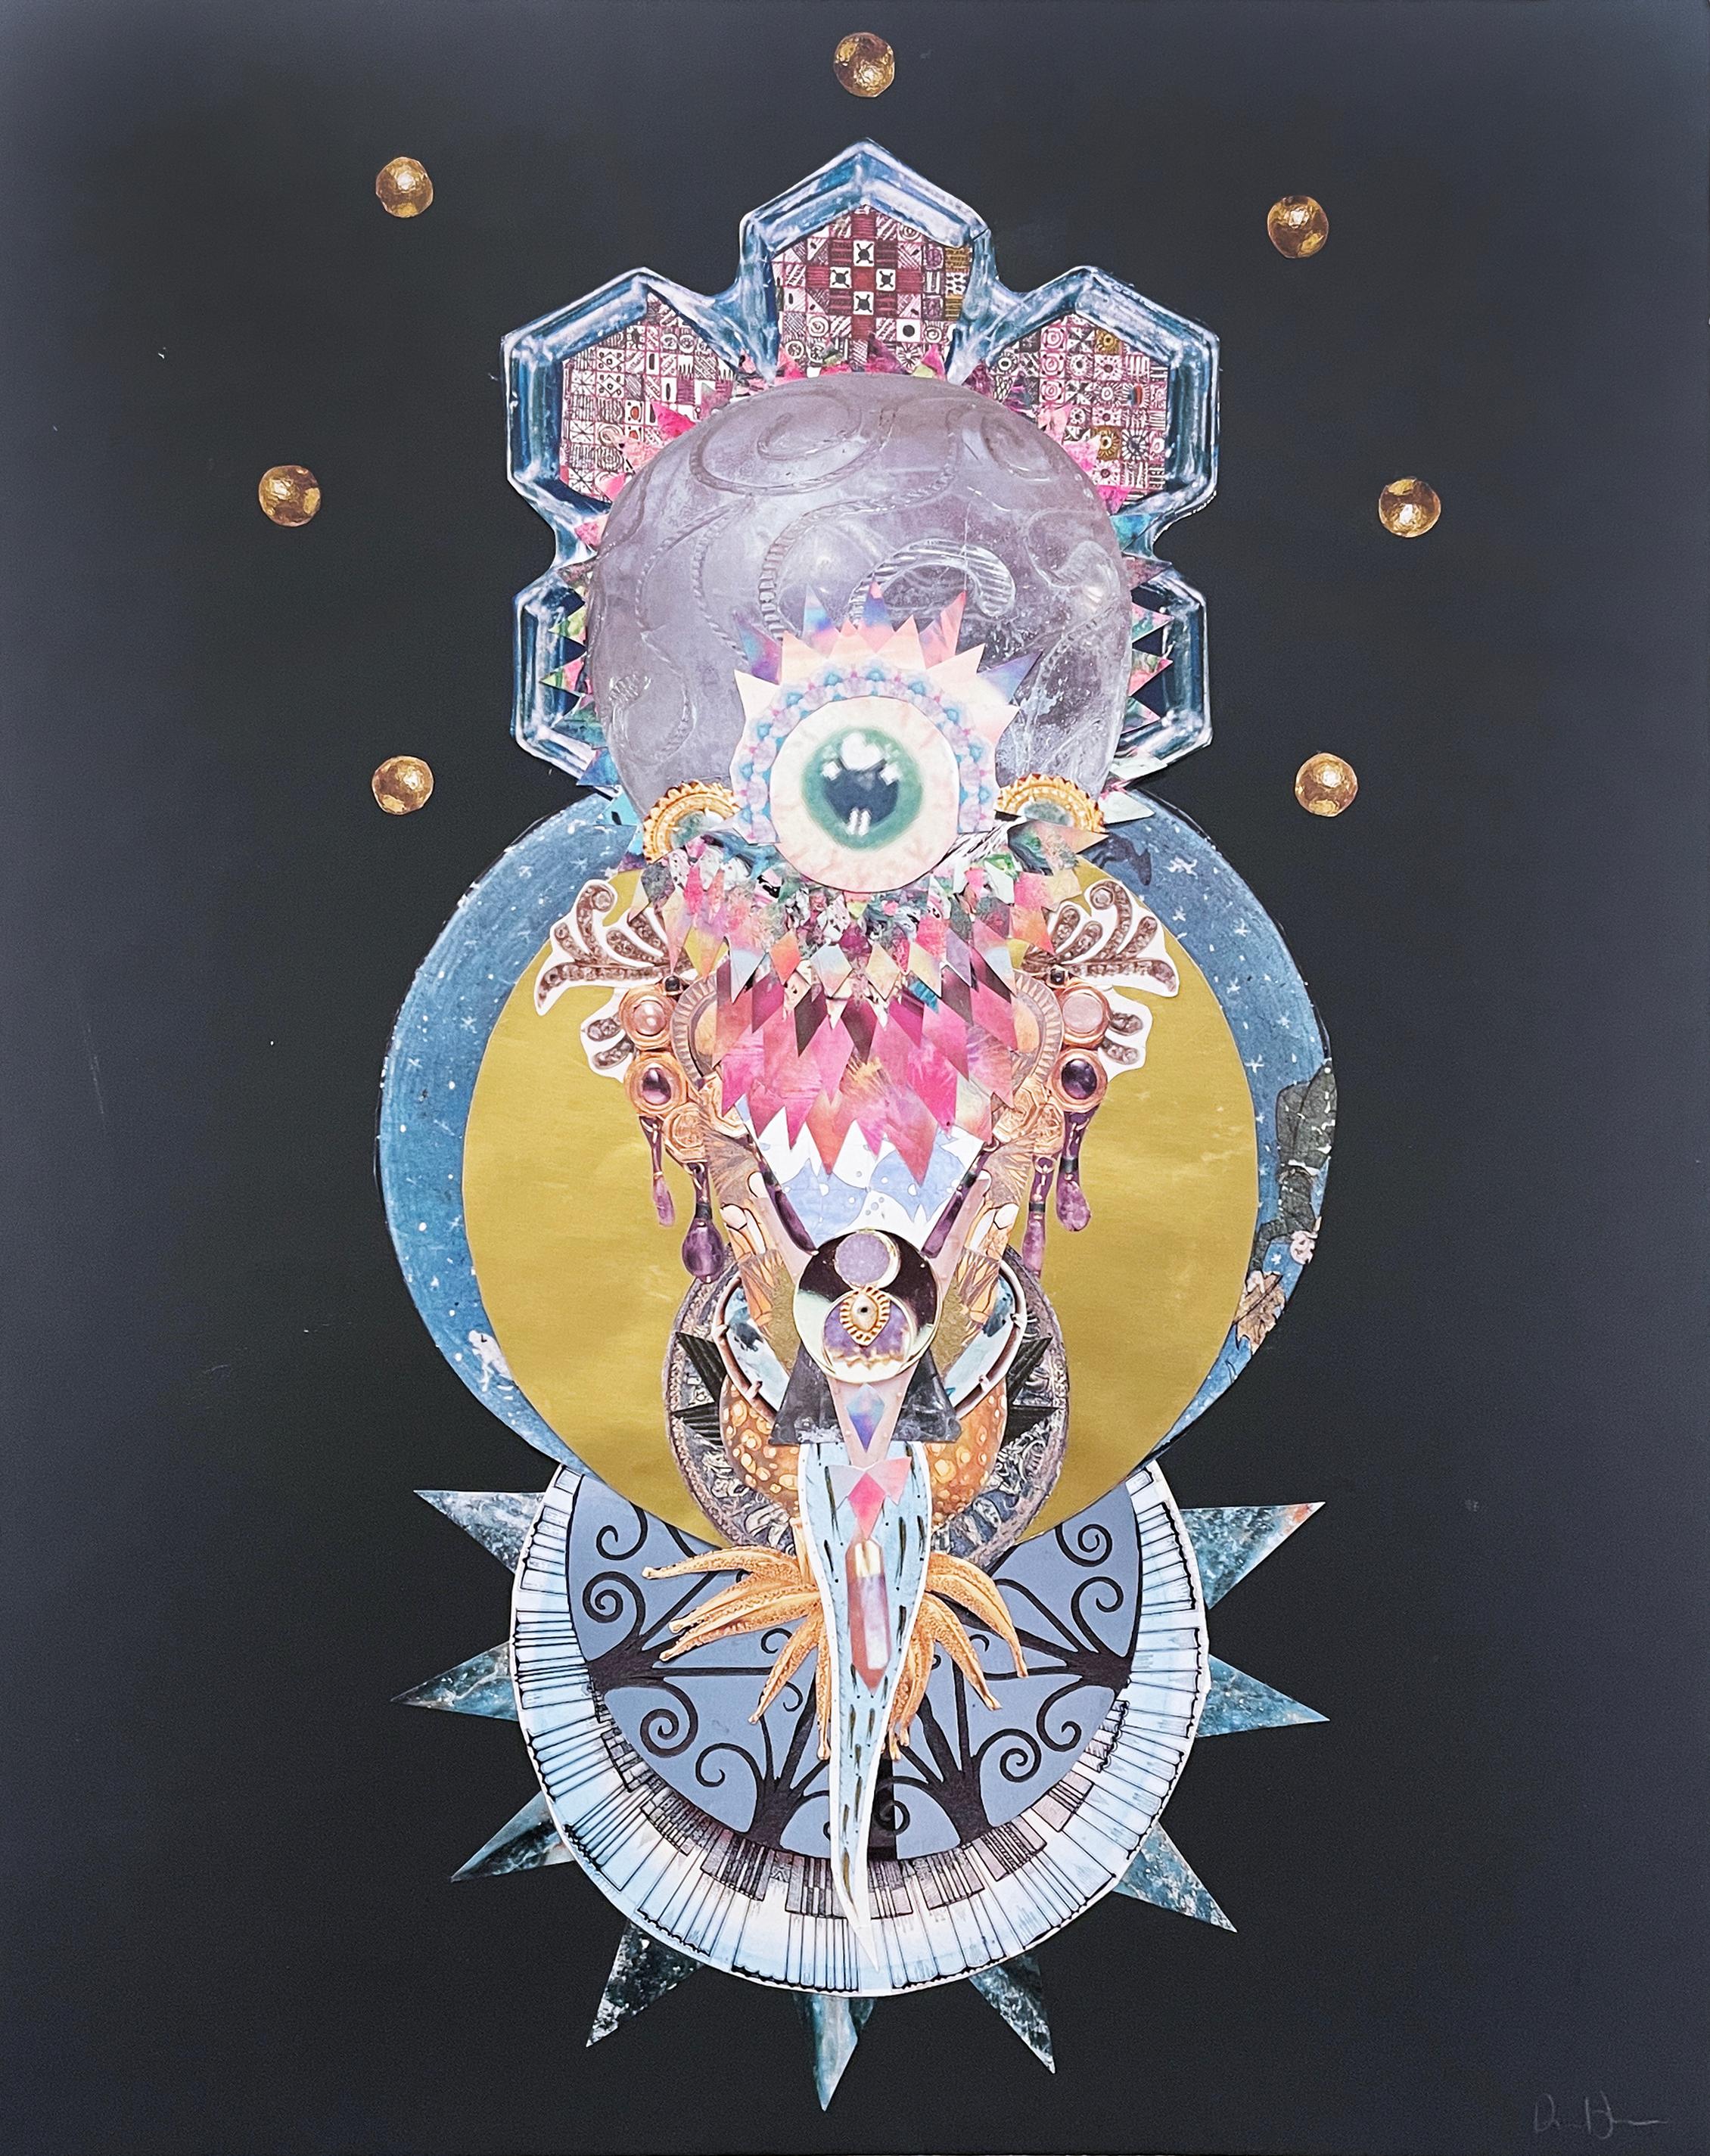 The Messenger, 2022, cosmic art, surreal, abstract, collage, star, eye, gold - Contemporary Mixed Media Art by Deming King Harriman